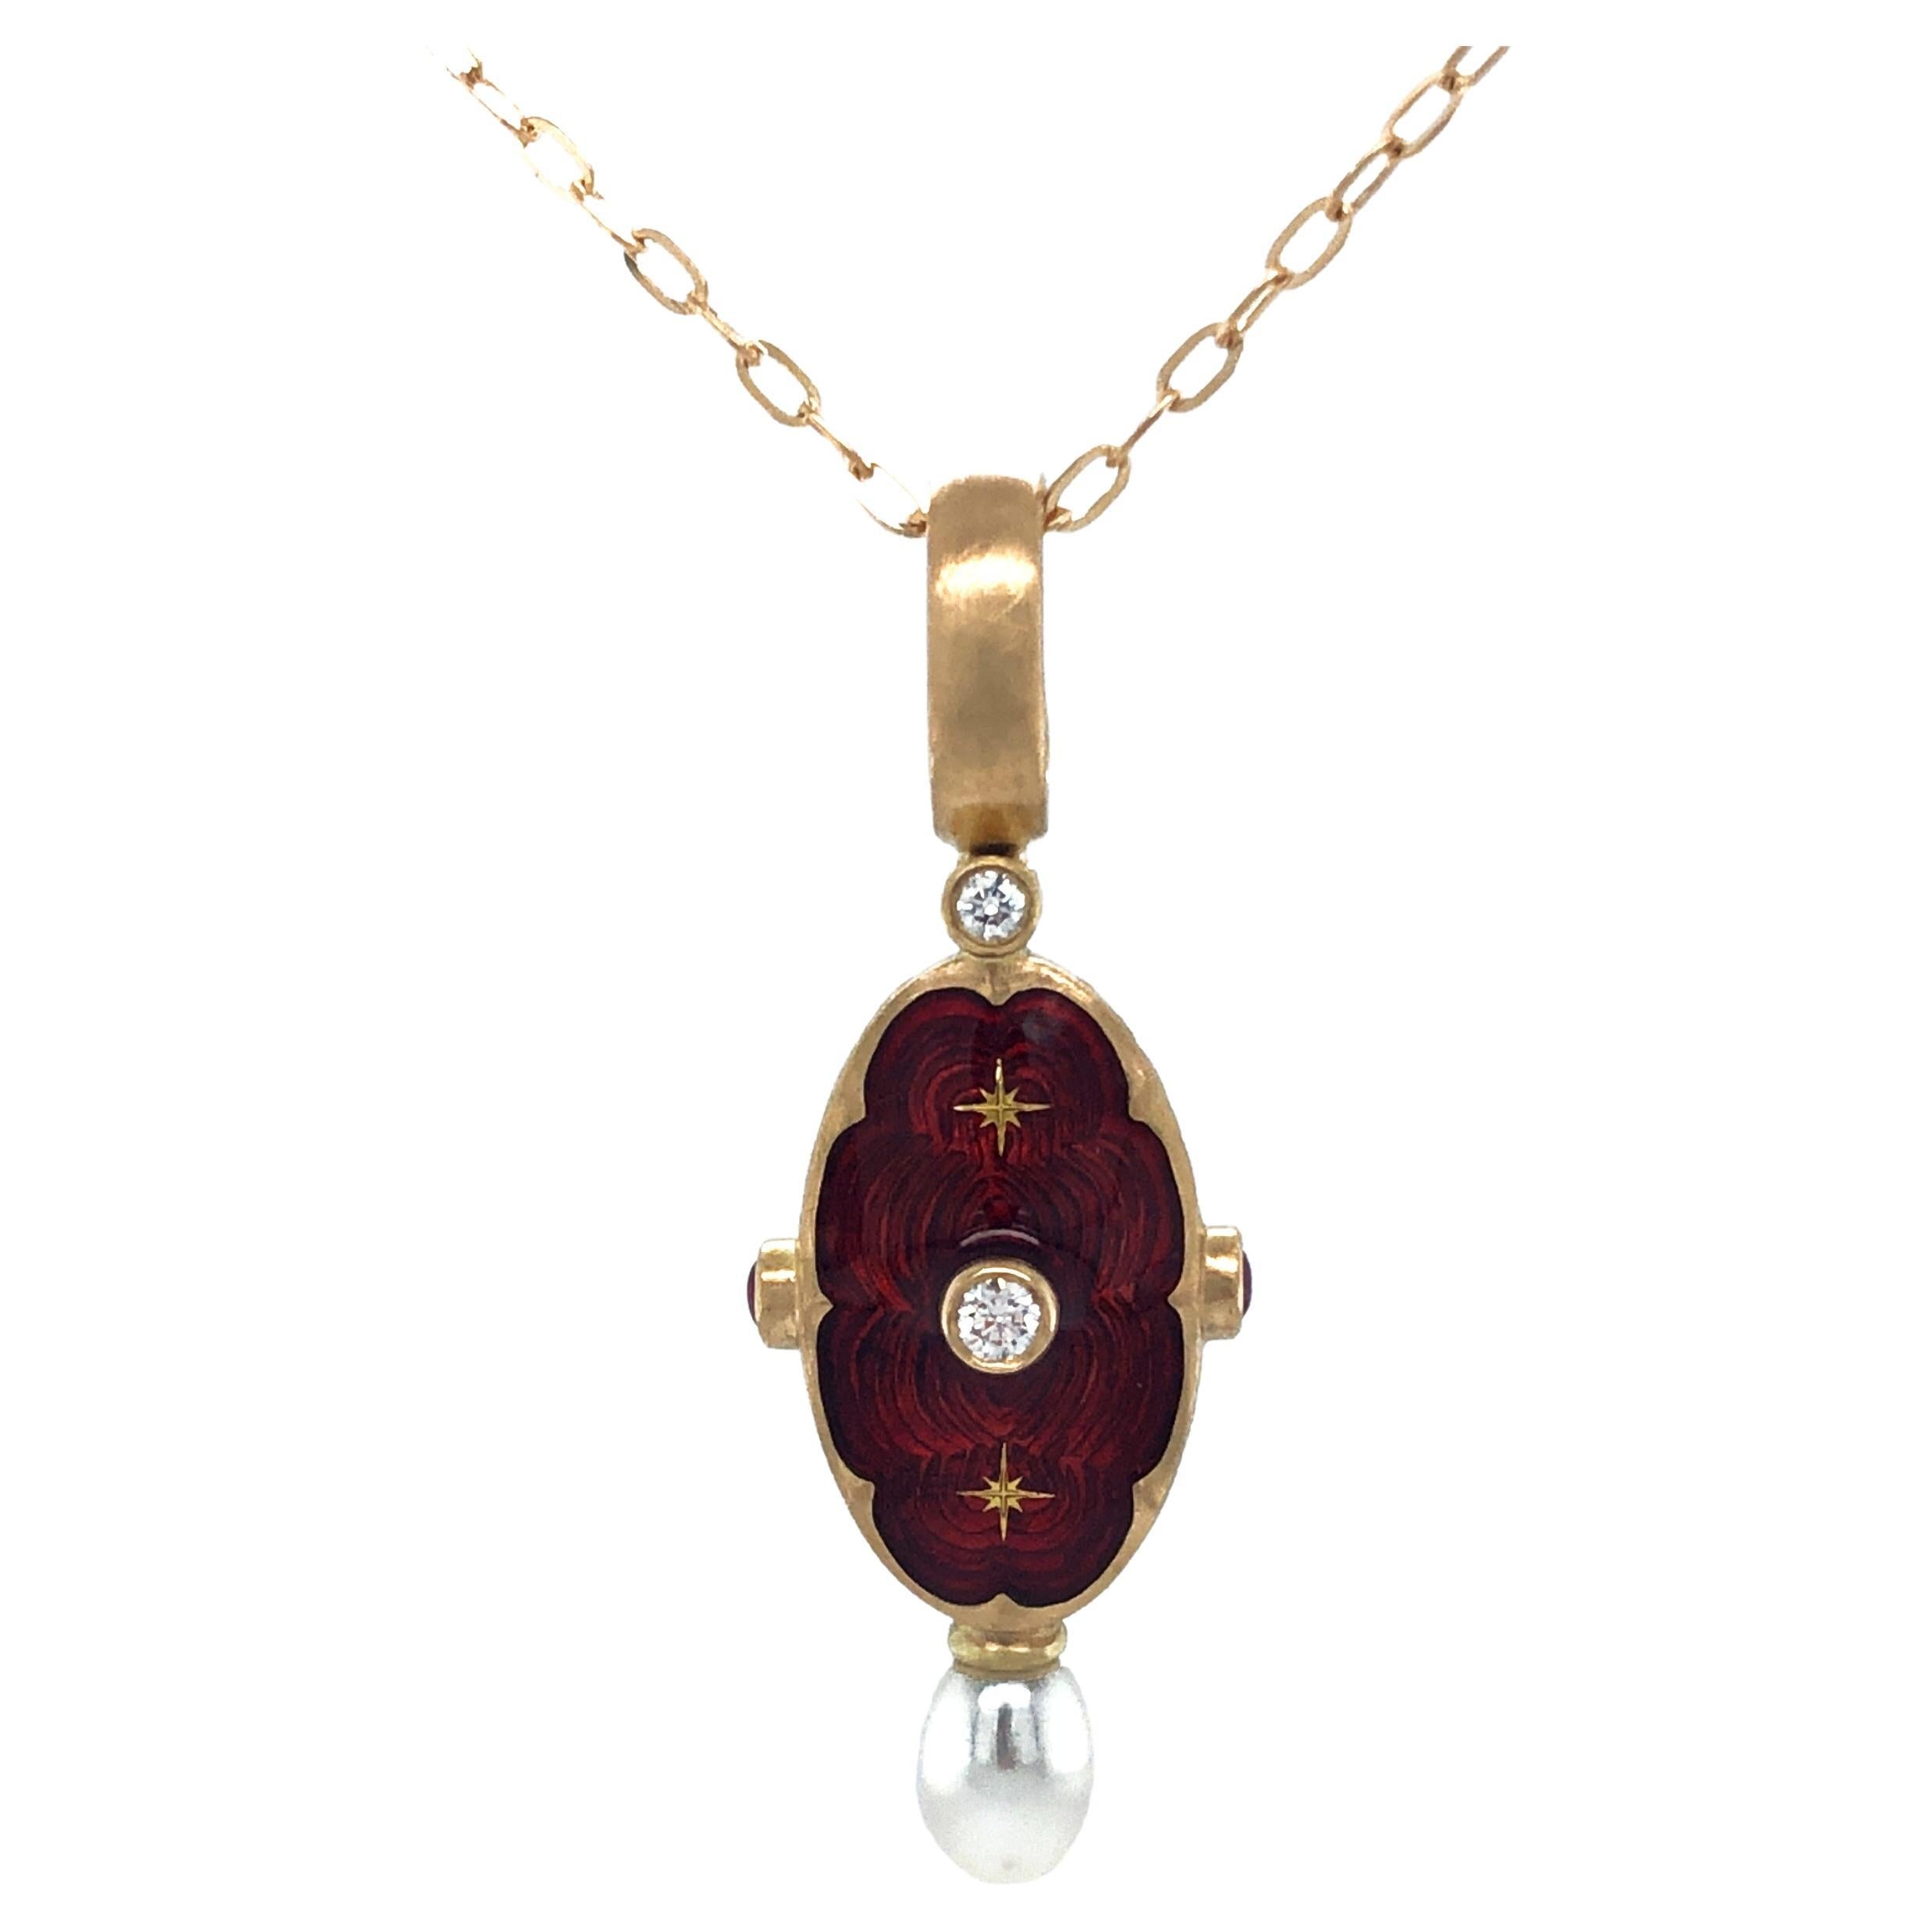 Oval Pendant Necklace 18k Yellow Gold Red Enamel 2 Rubies 1 Pearl 2 Star Paillon